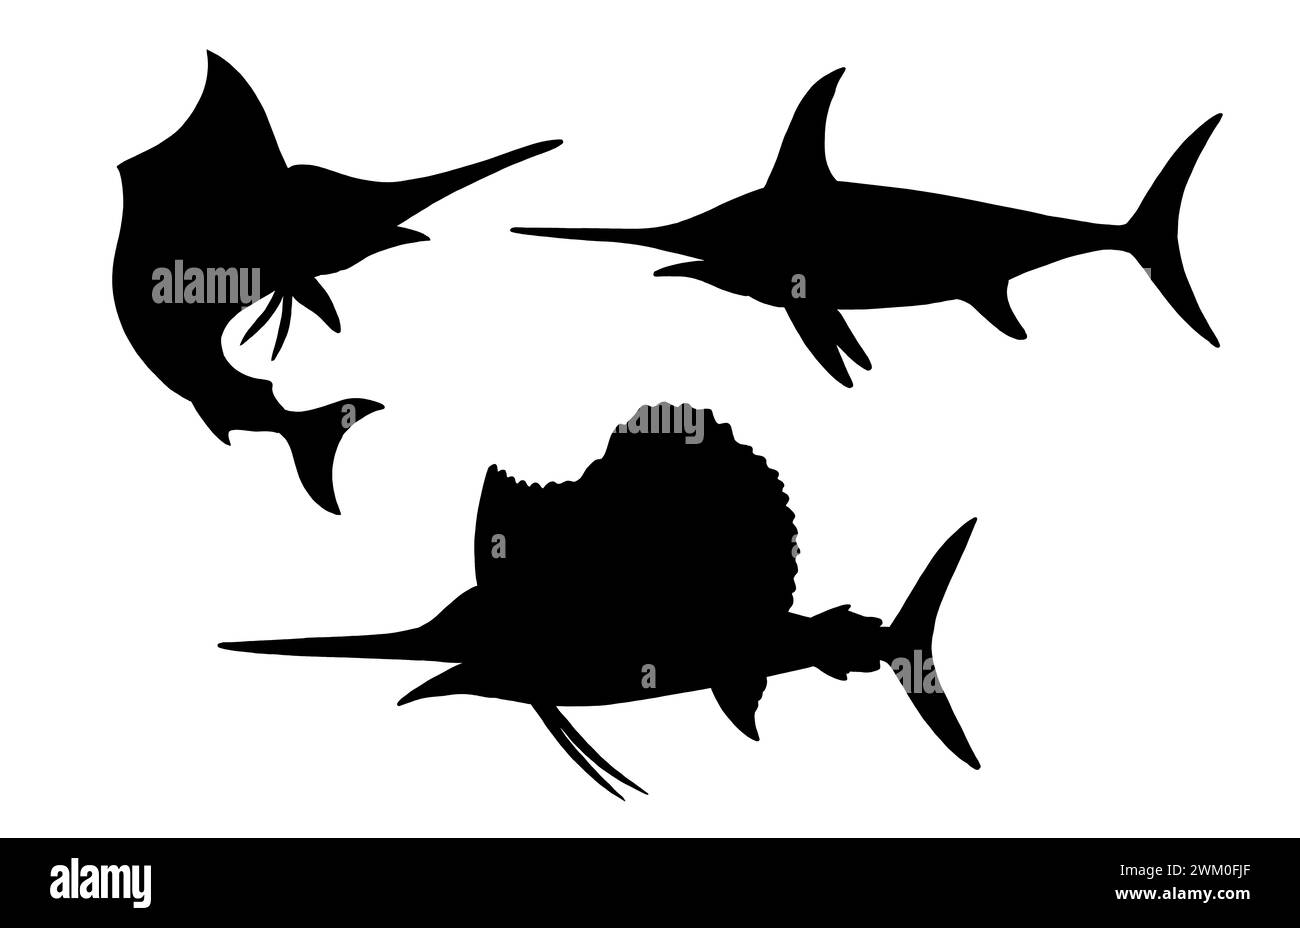 Silhouette of swordfish. Drawing with fish. Template to cut out. Stock Photo